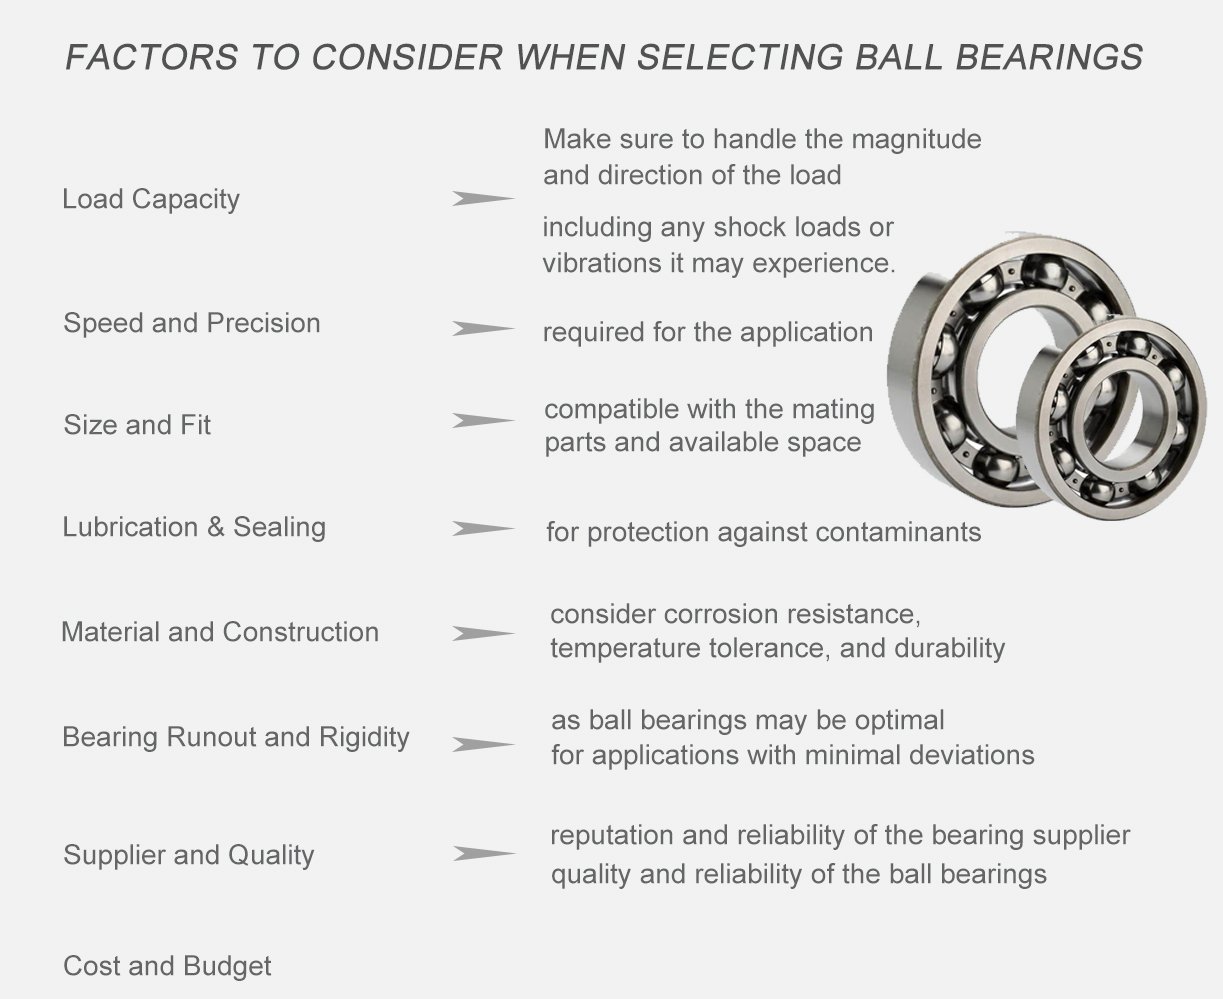 Factors to consider when selecting ball bearings